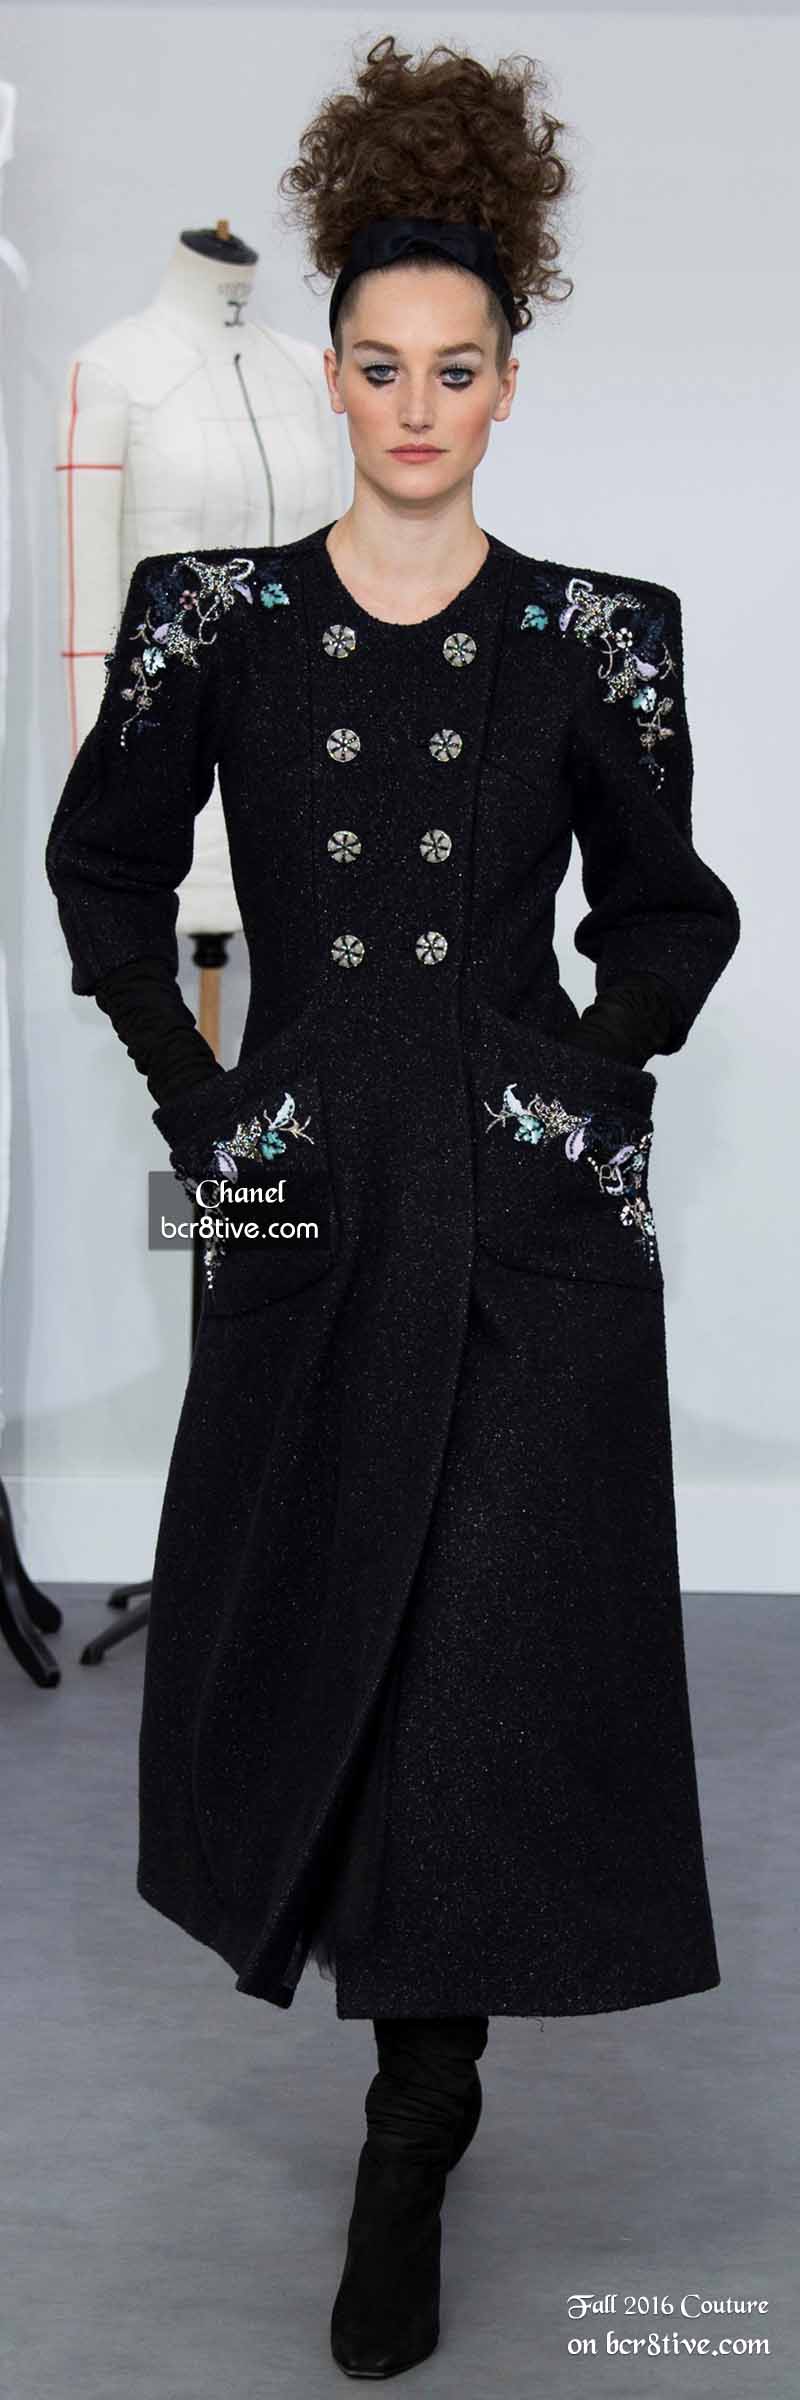 Chanel - The Best Fall 2016 Haute Couture Fashion